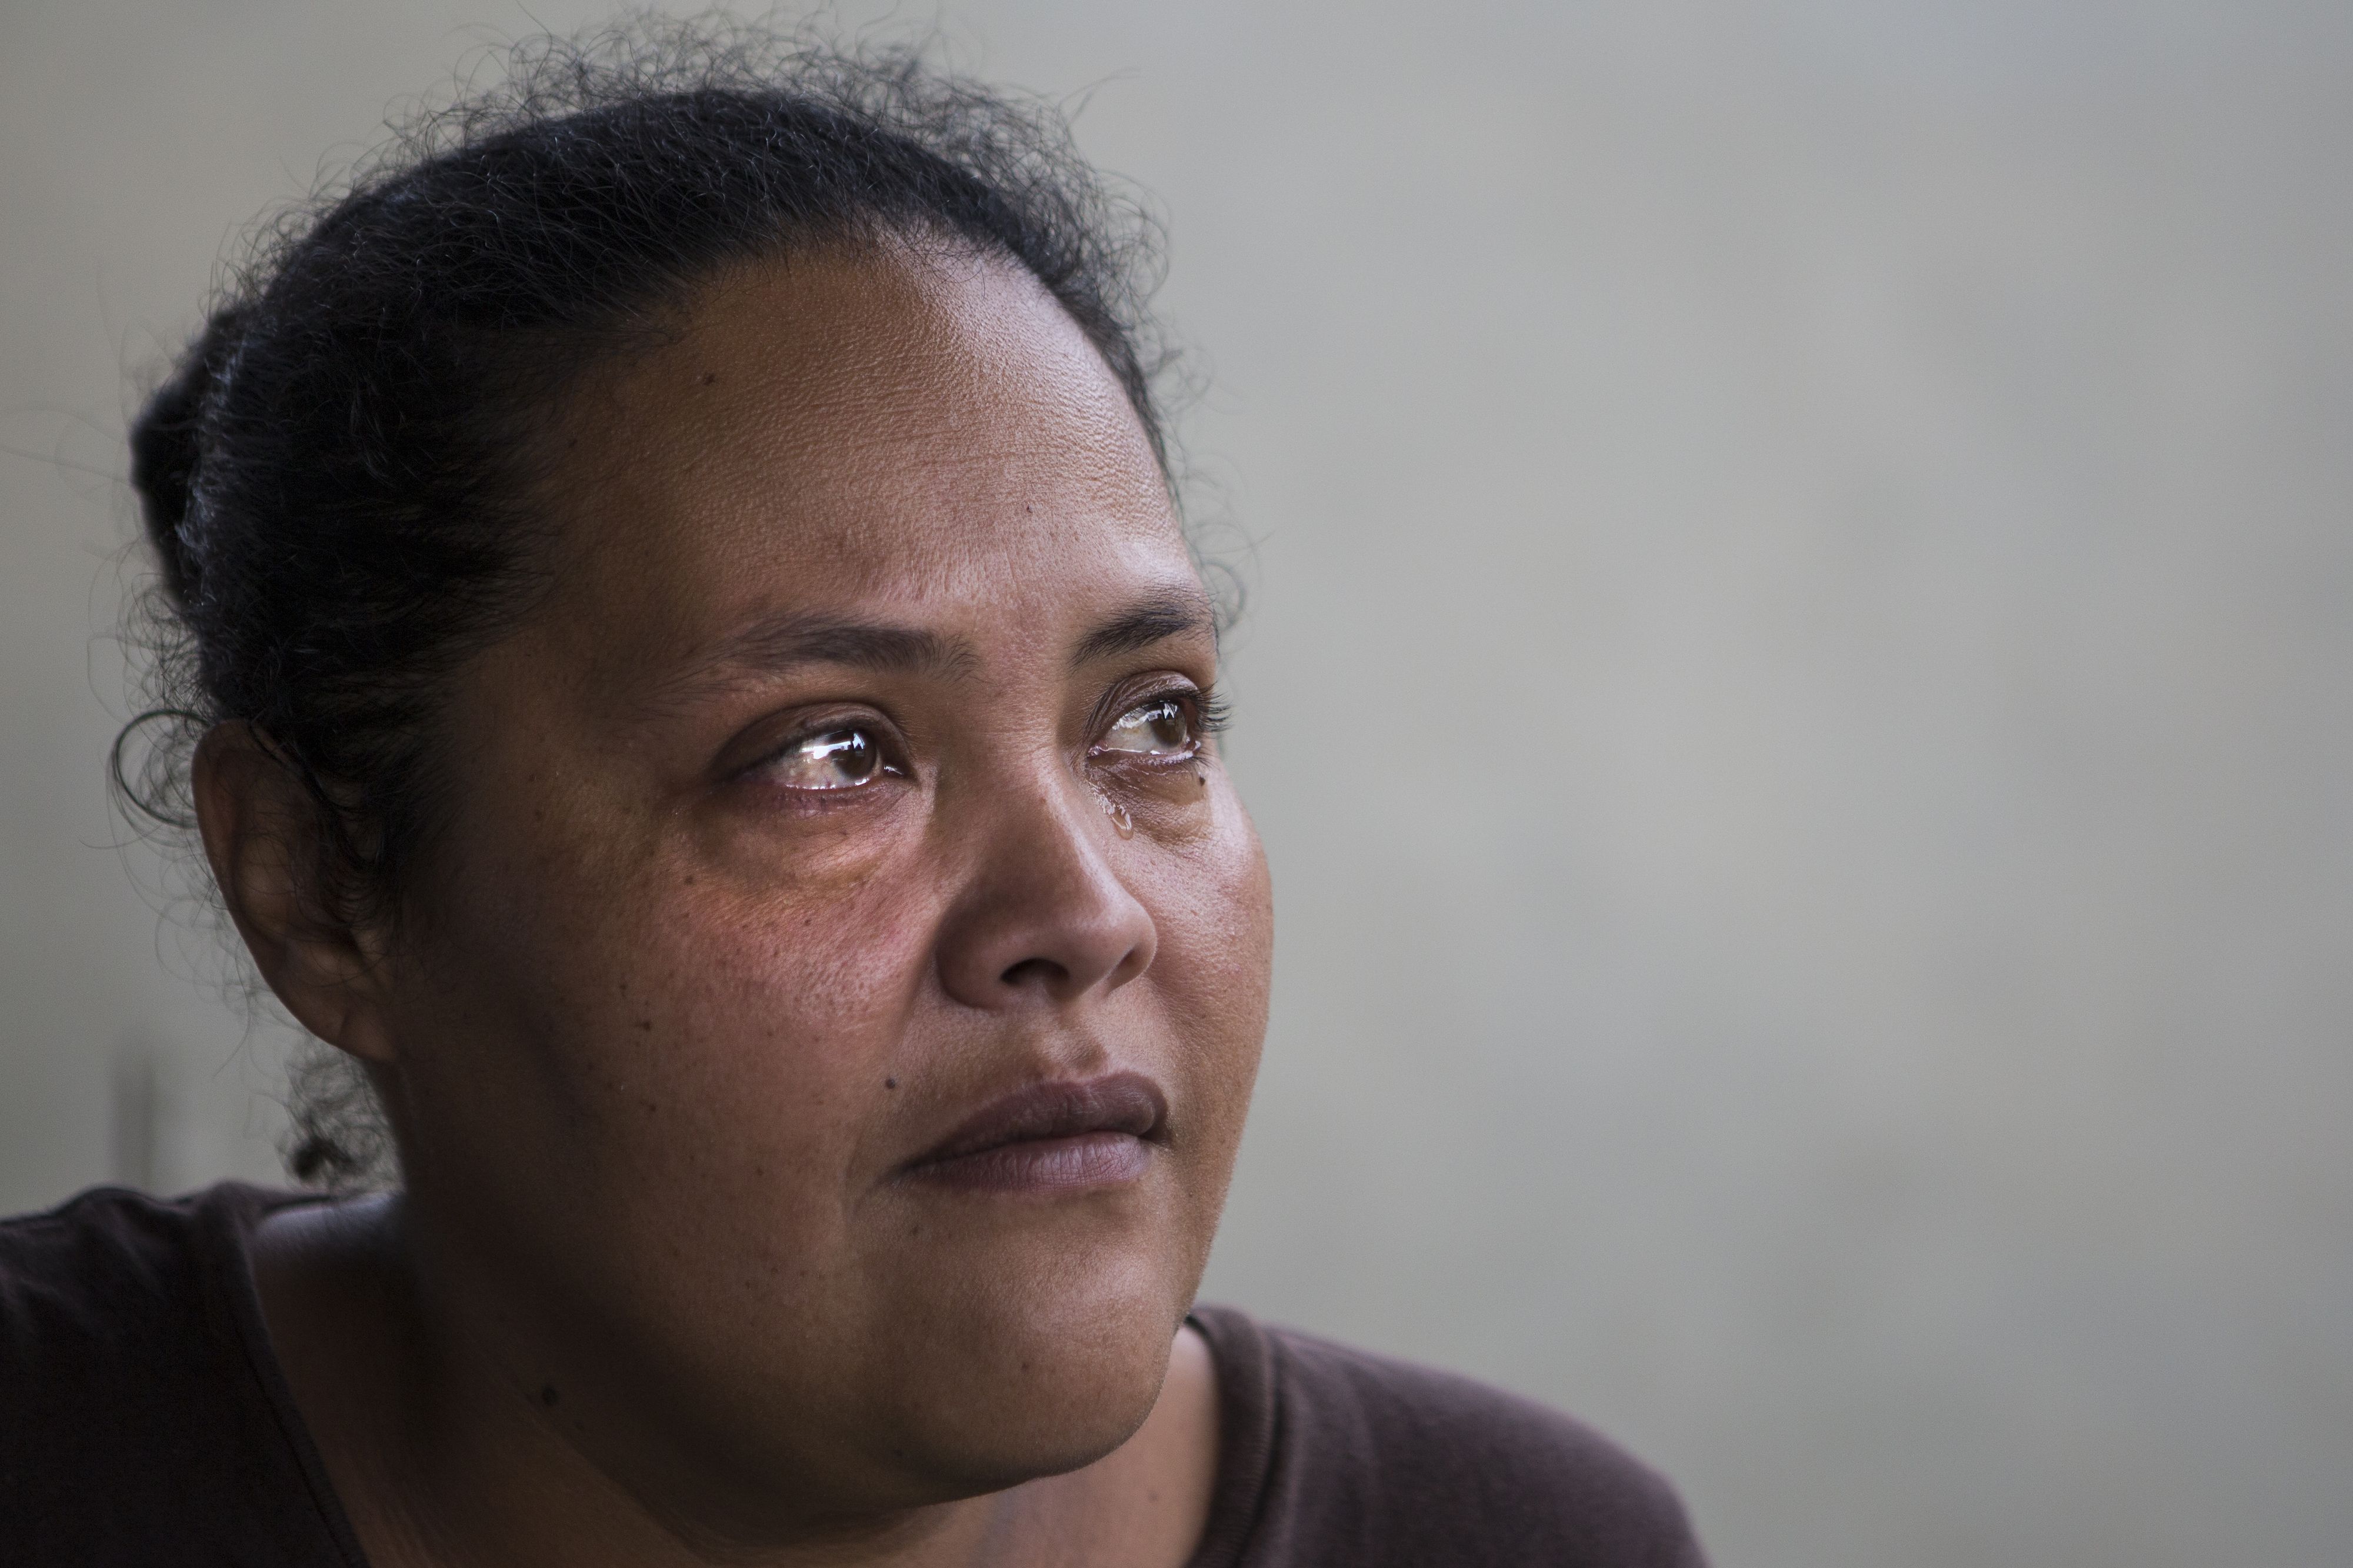 Karen Feliciano sheds a tear while seated on the porch of the family's home. Image by Ryan Michalesko. Puerto Rico, 2017.